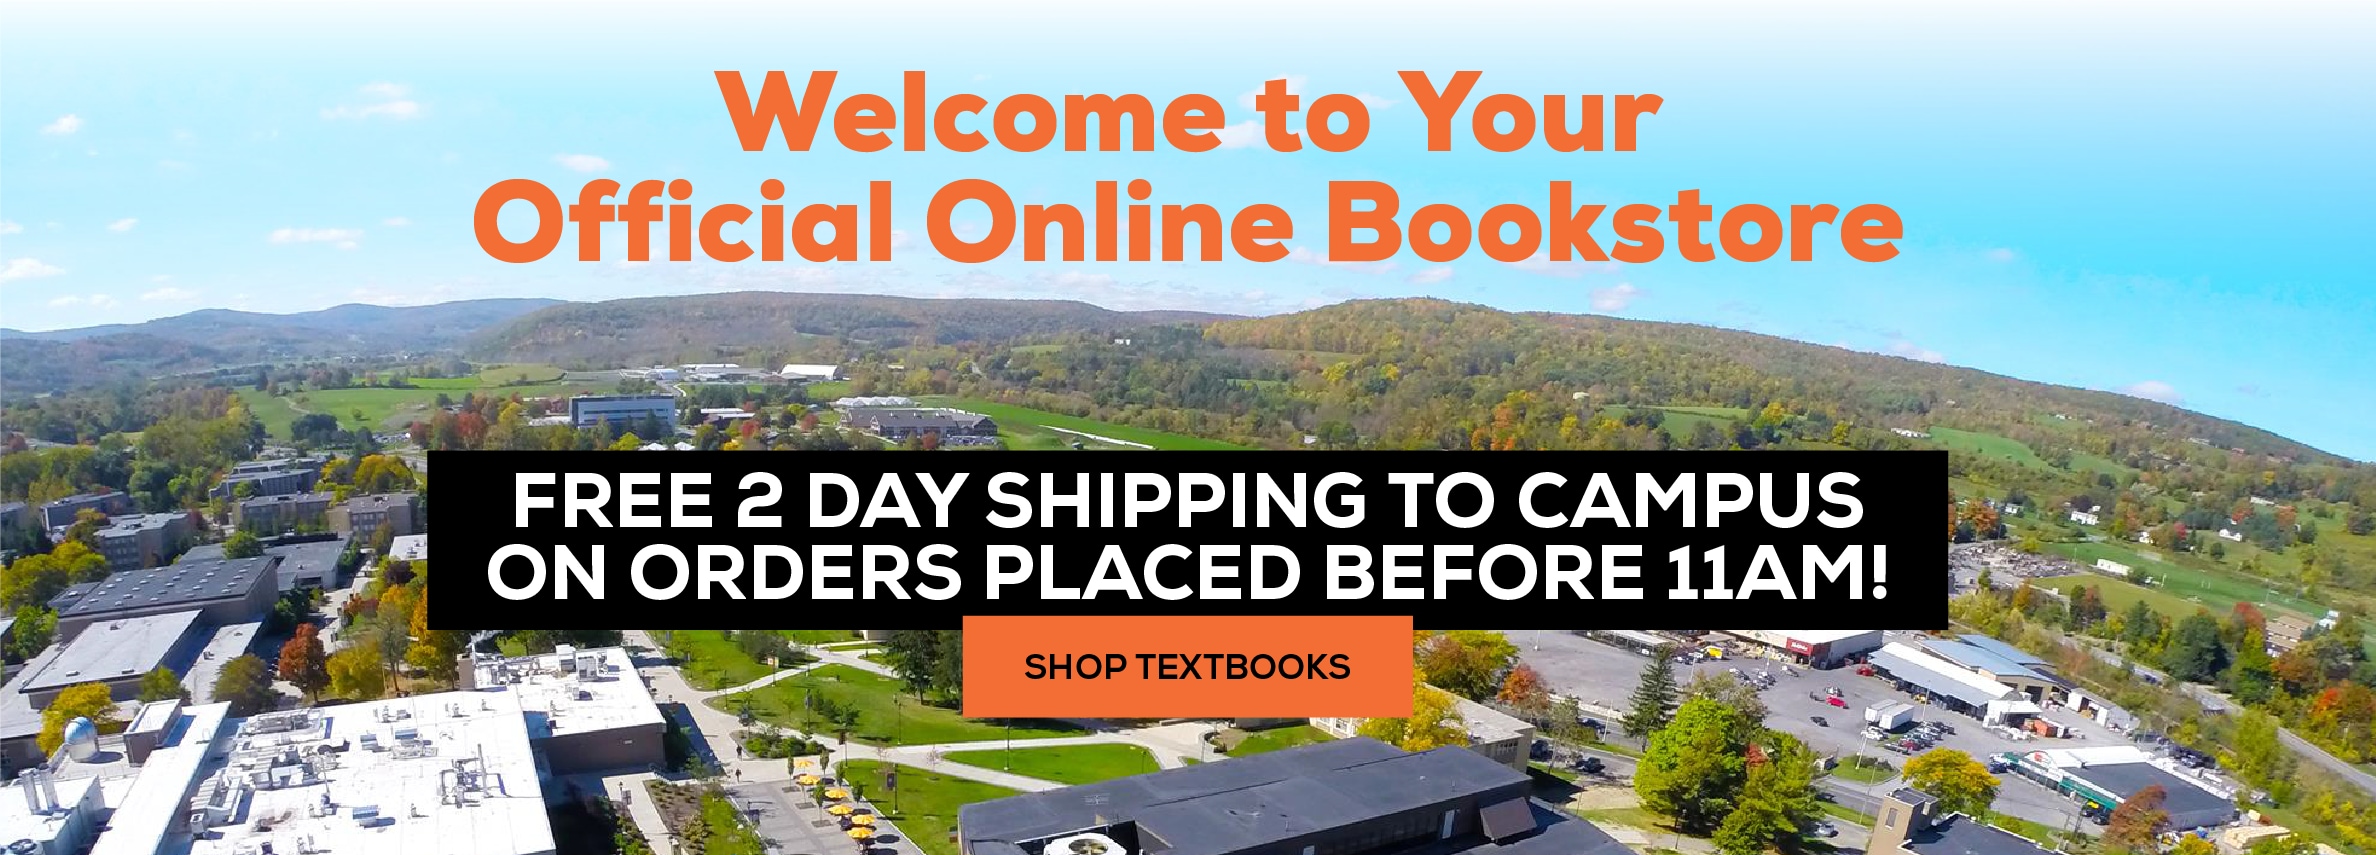 Welcome to your official online bookstore. Free 2 Day Shipping to Campus on orders placed before 11am shop textbooks